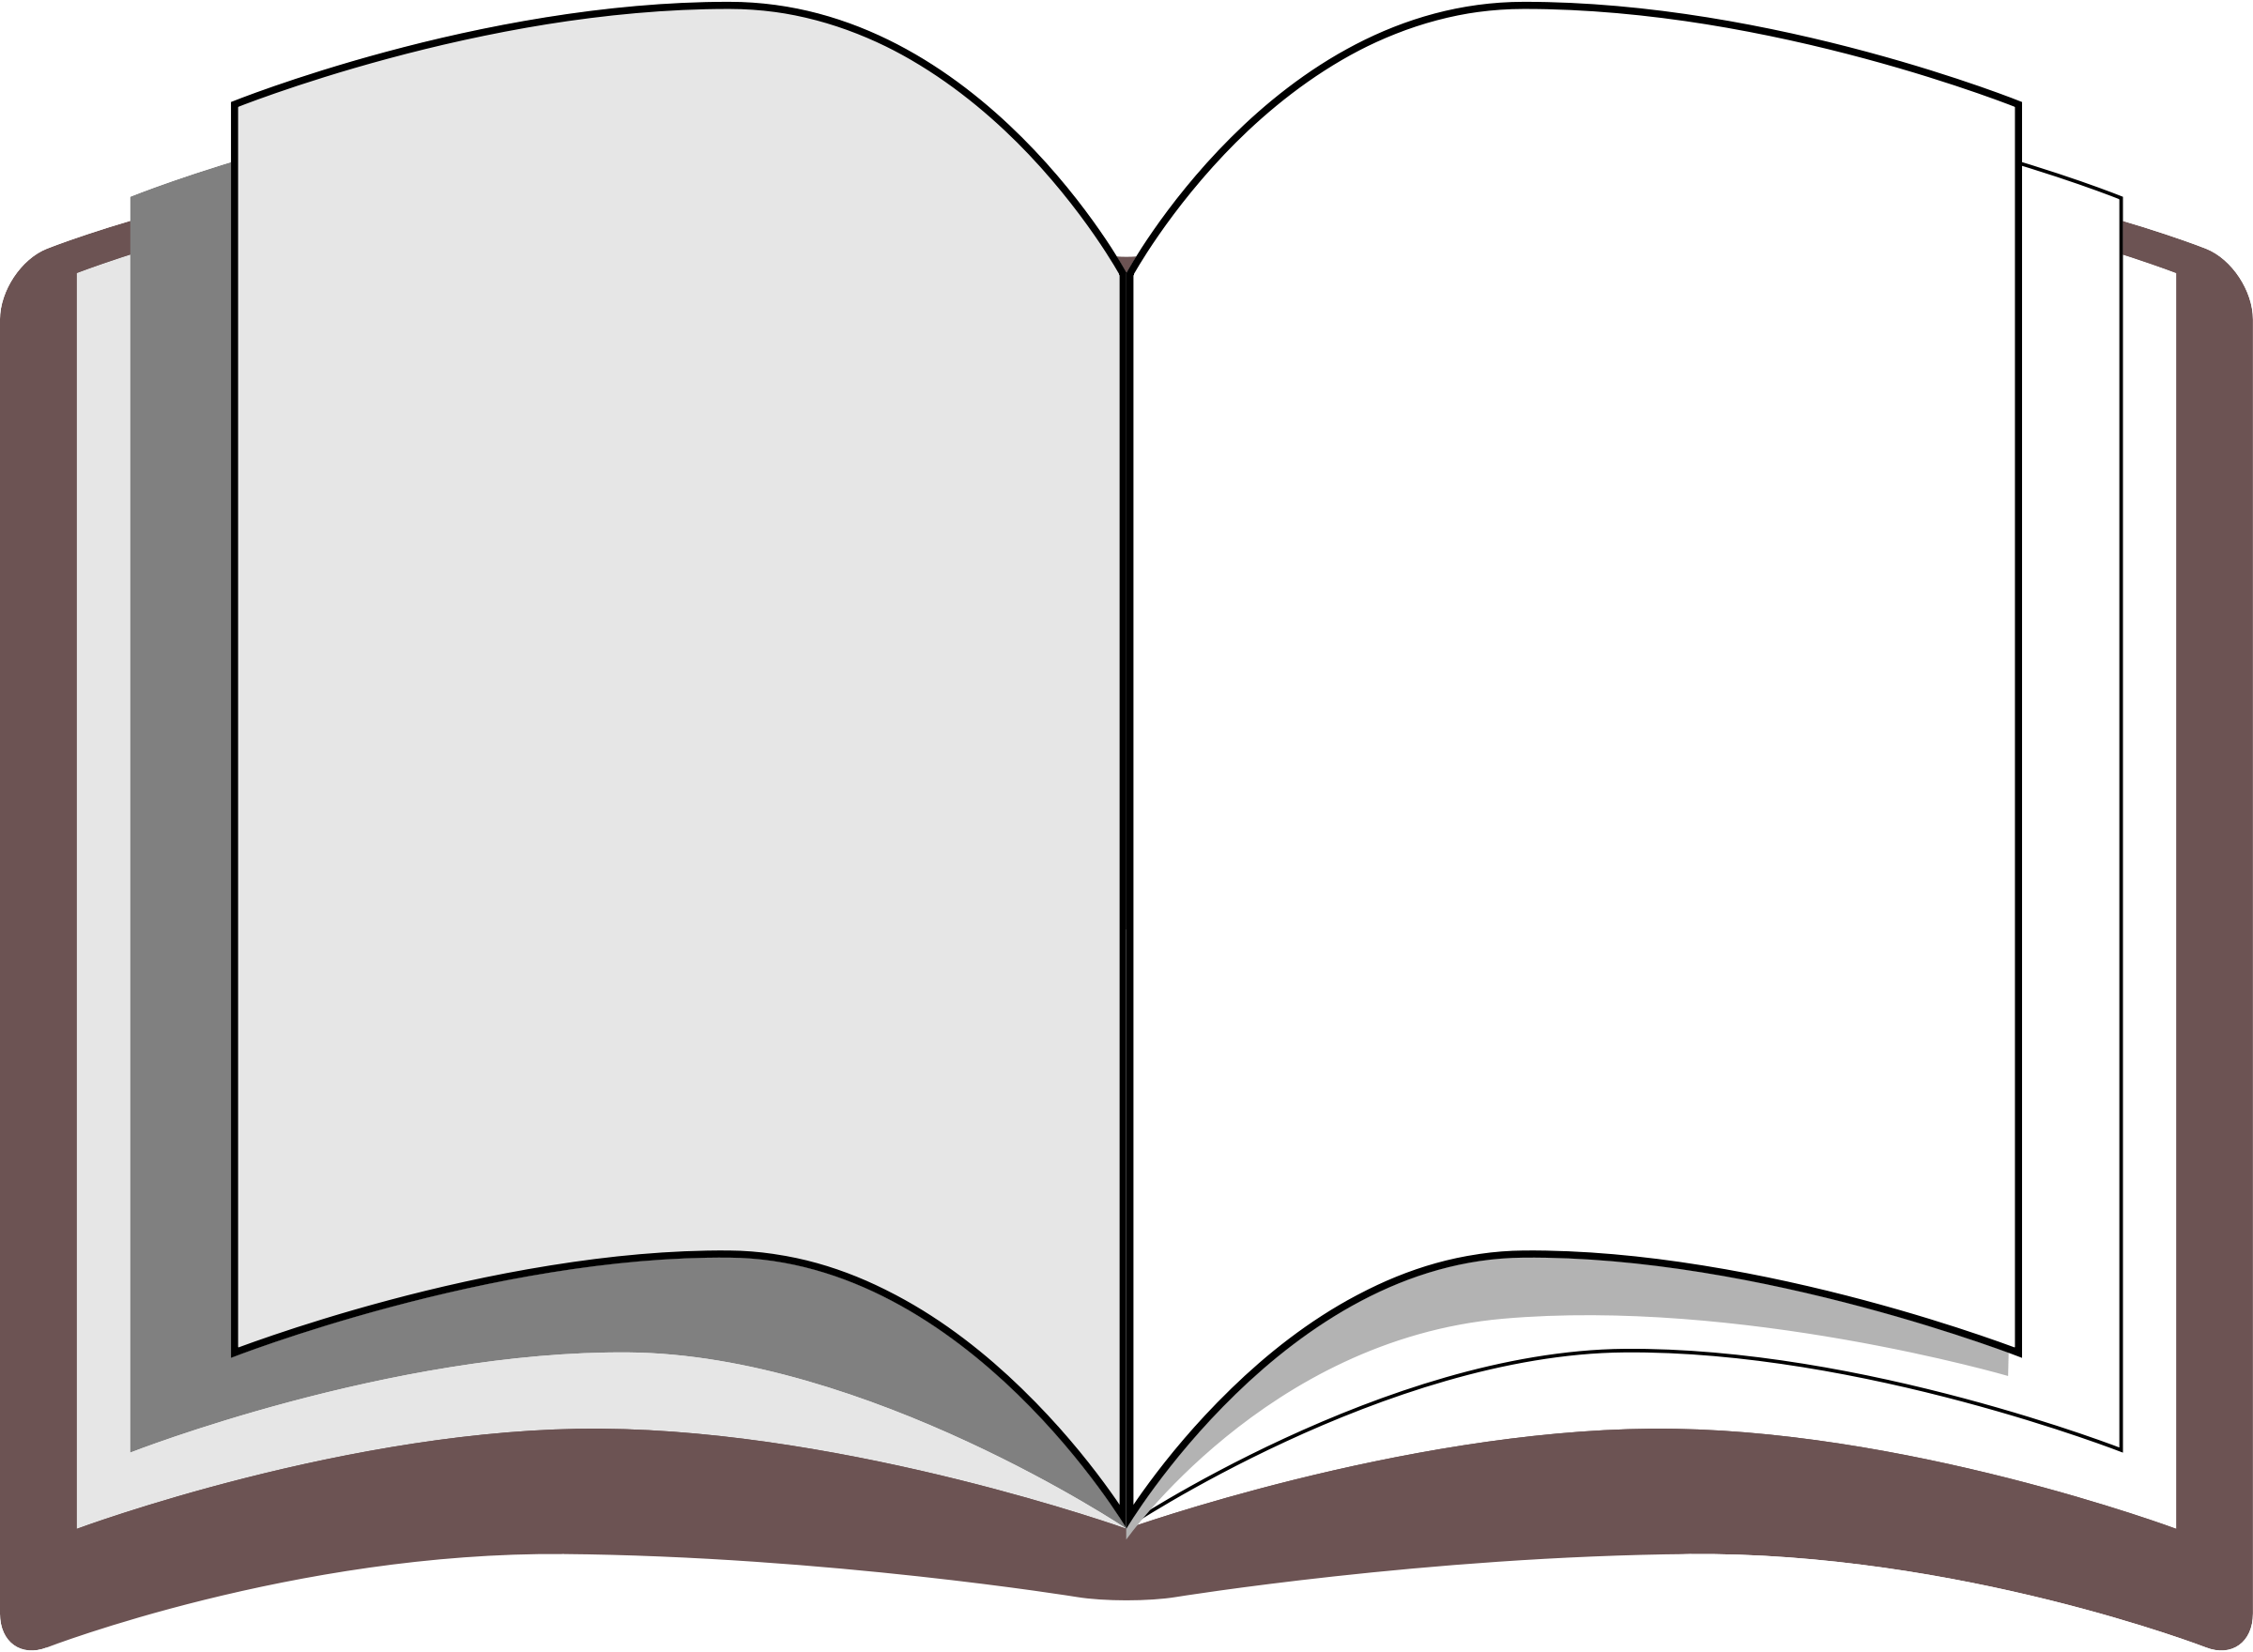 Images Of Open Books - ClipArt Best